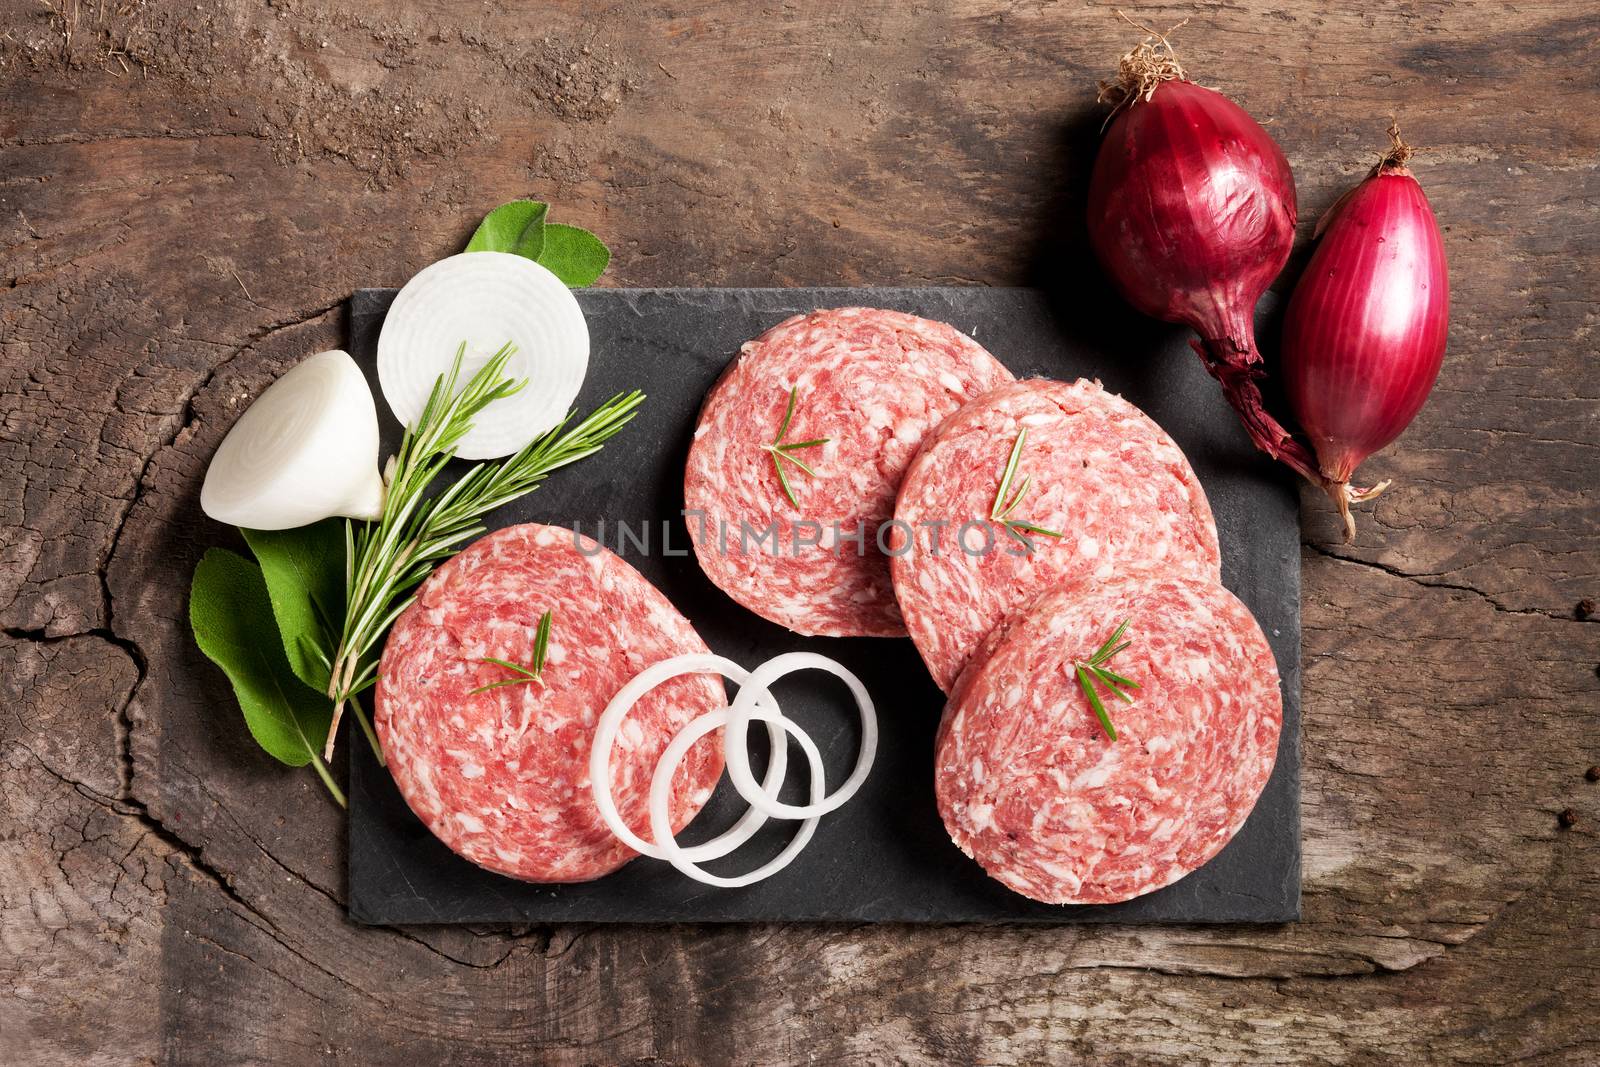 Slices of fresh salami on board with onions and spices.